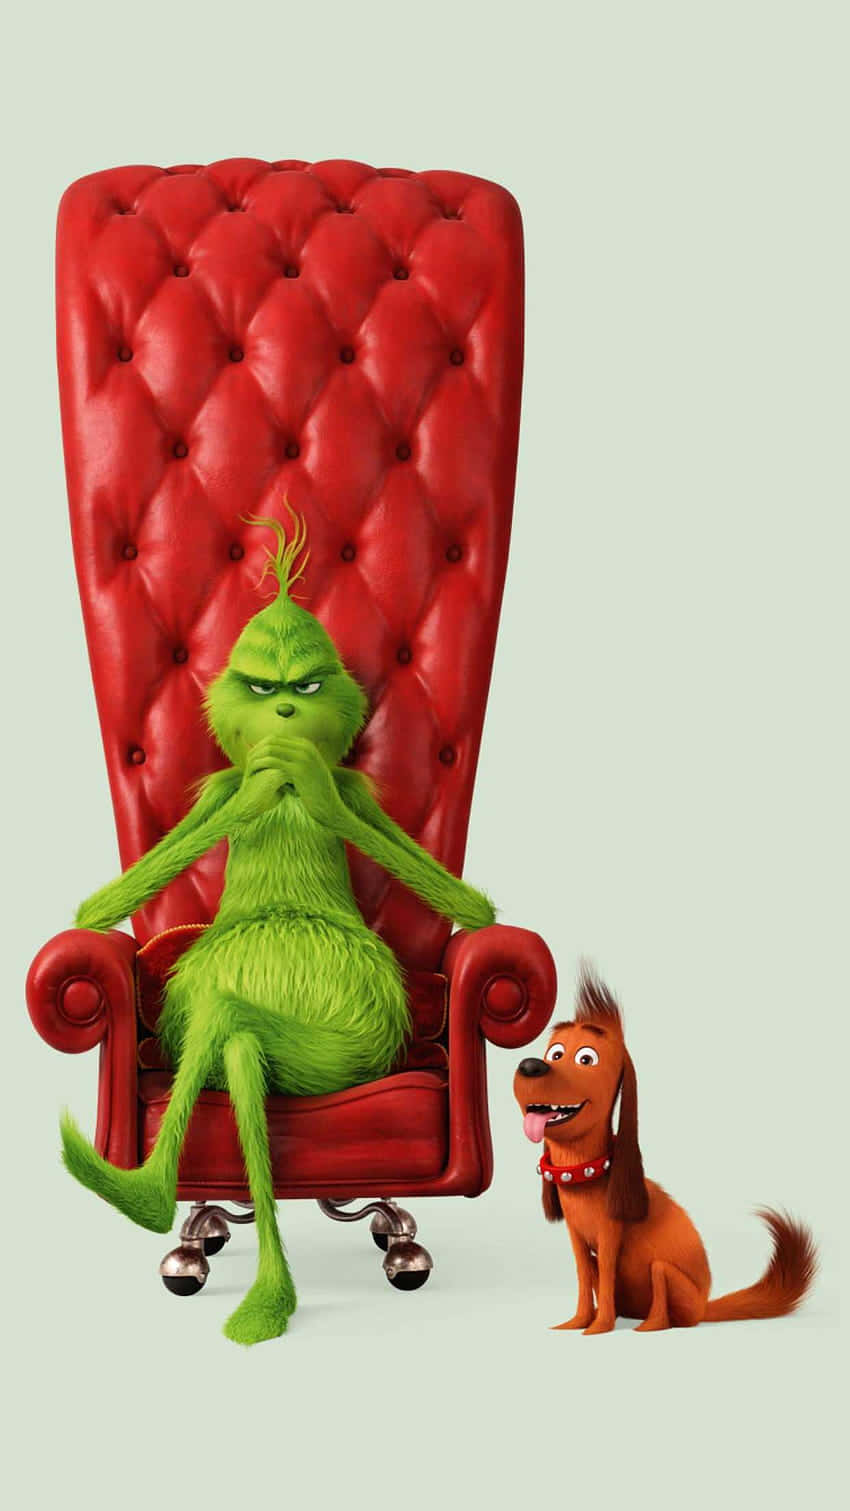 Grinchand Dogin Red Chair Wallpaper